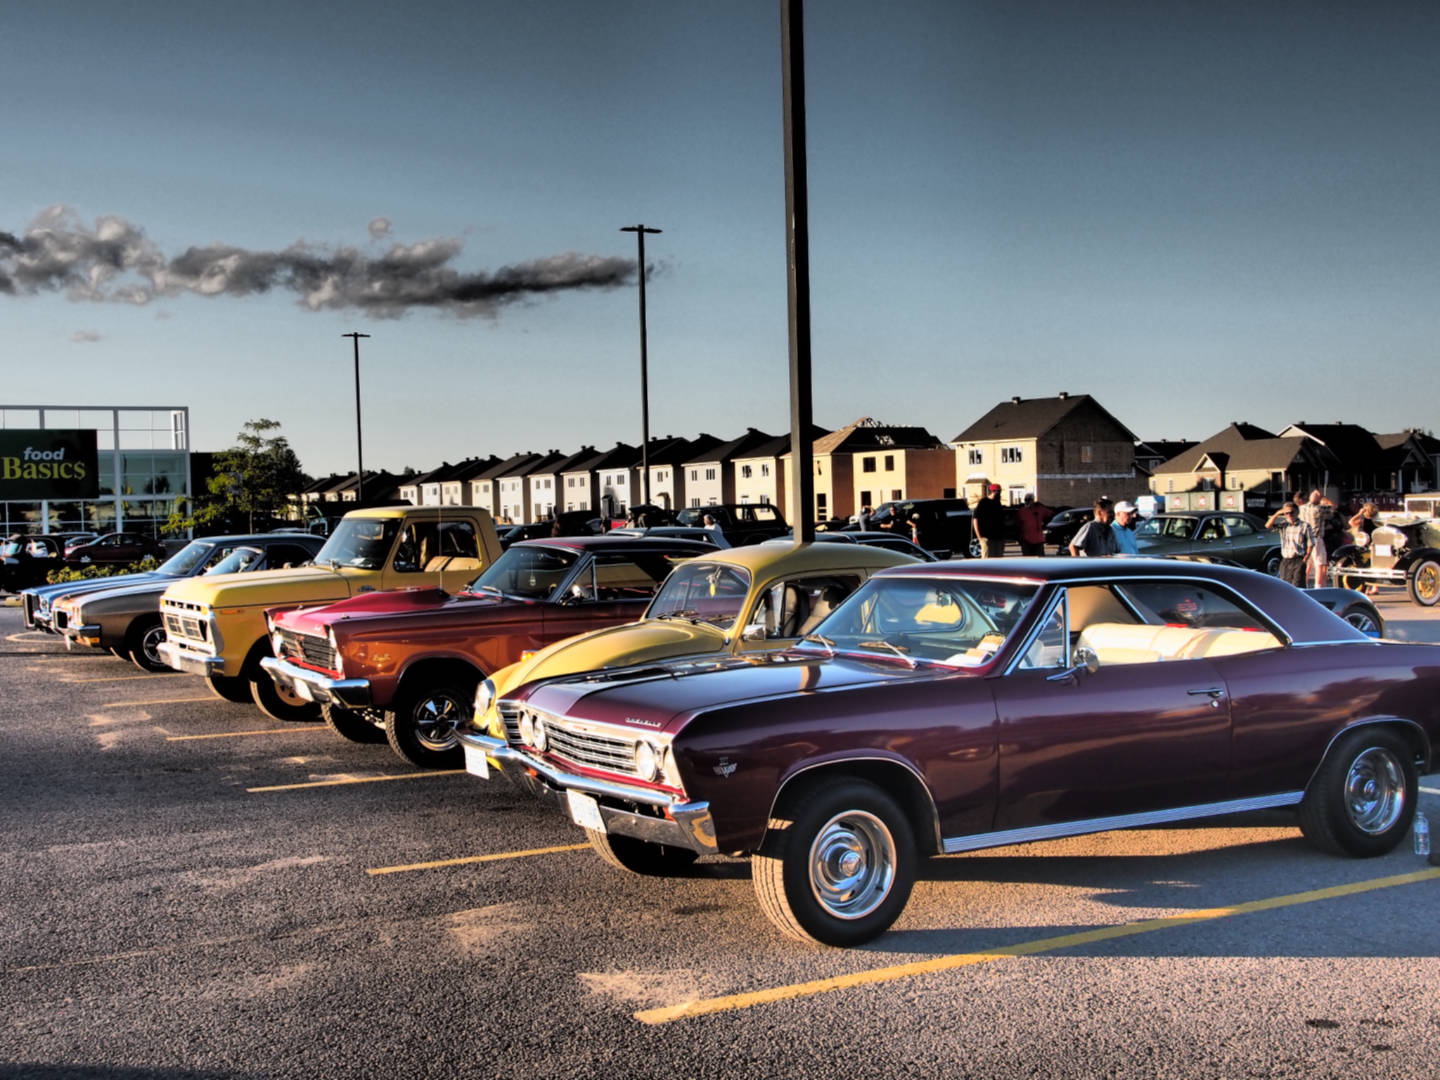 a photo of several classic muscle cars from the 1960's and 1970's taken at Kemptville Cruise Nights